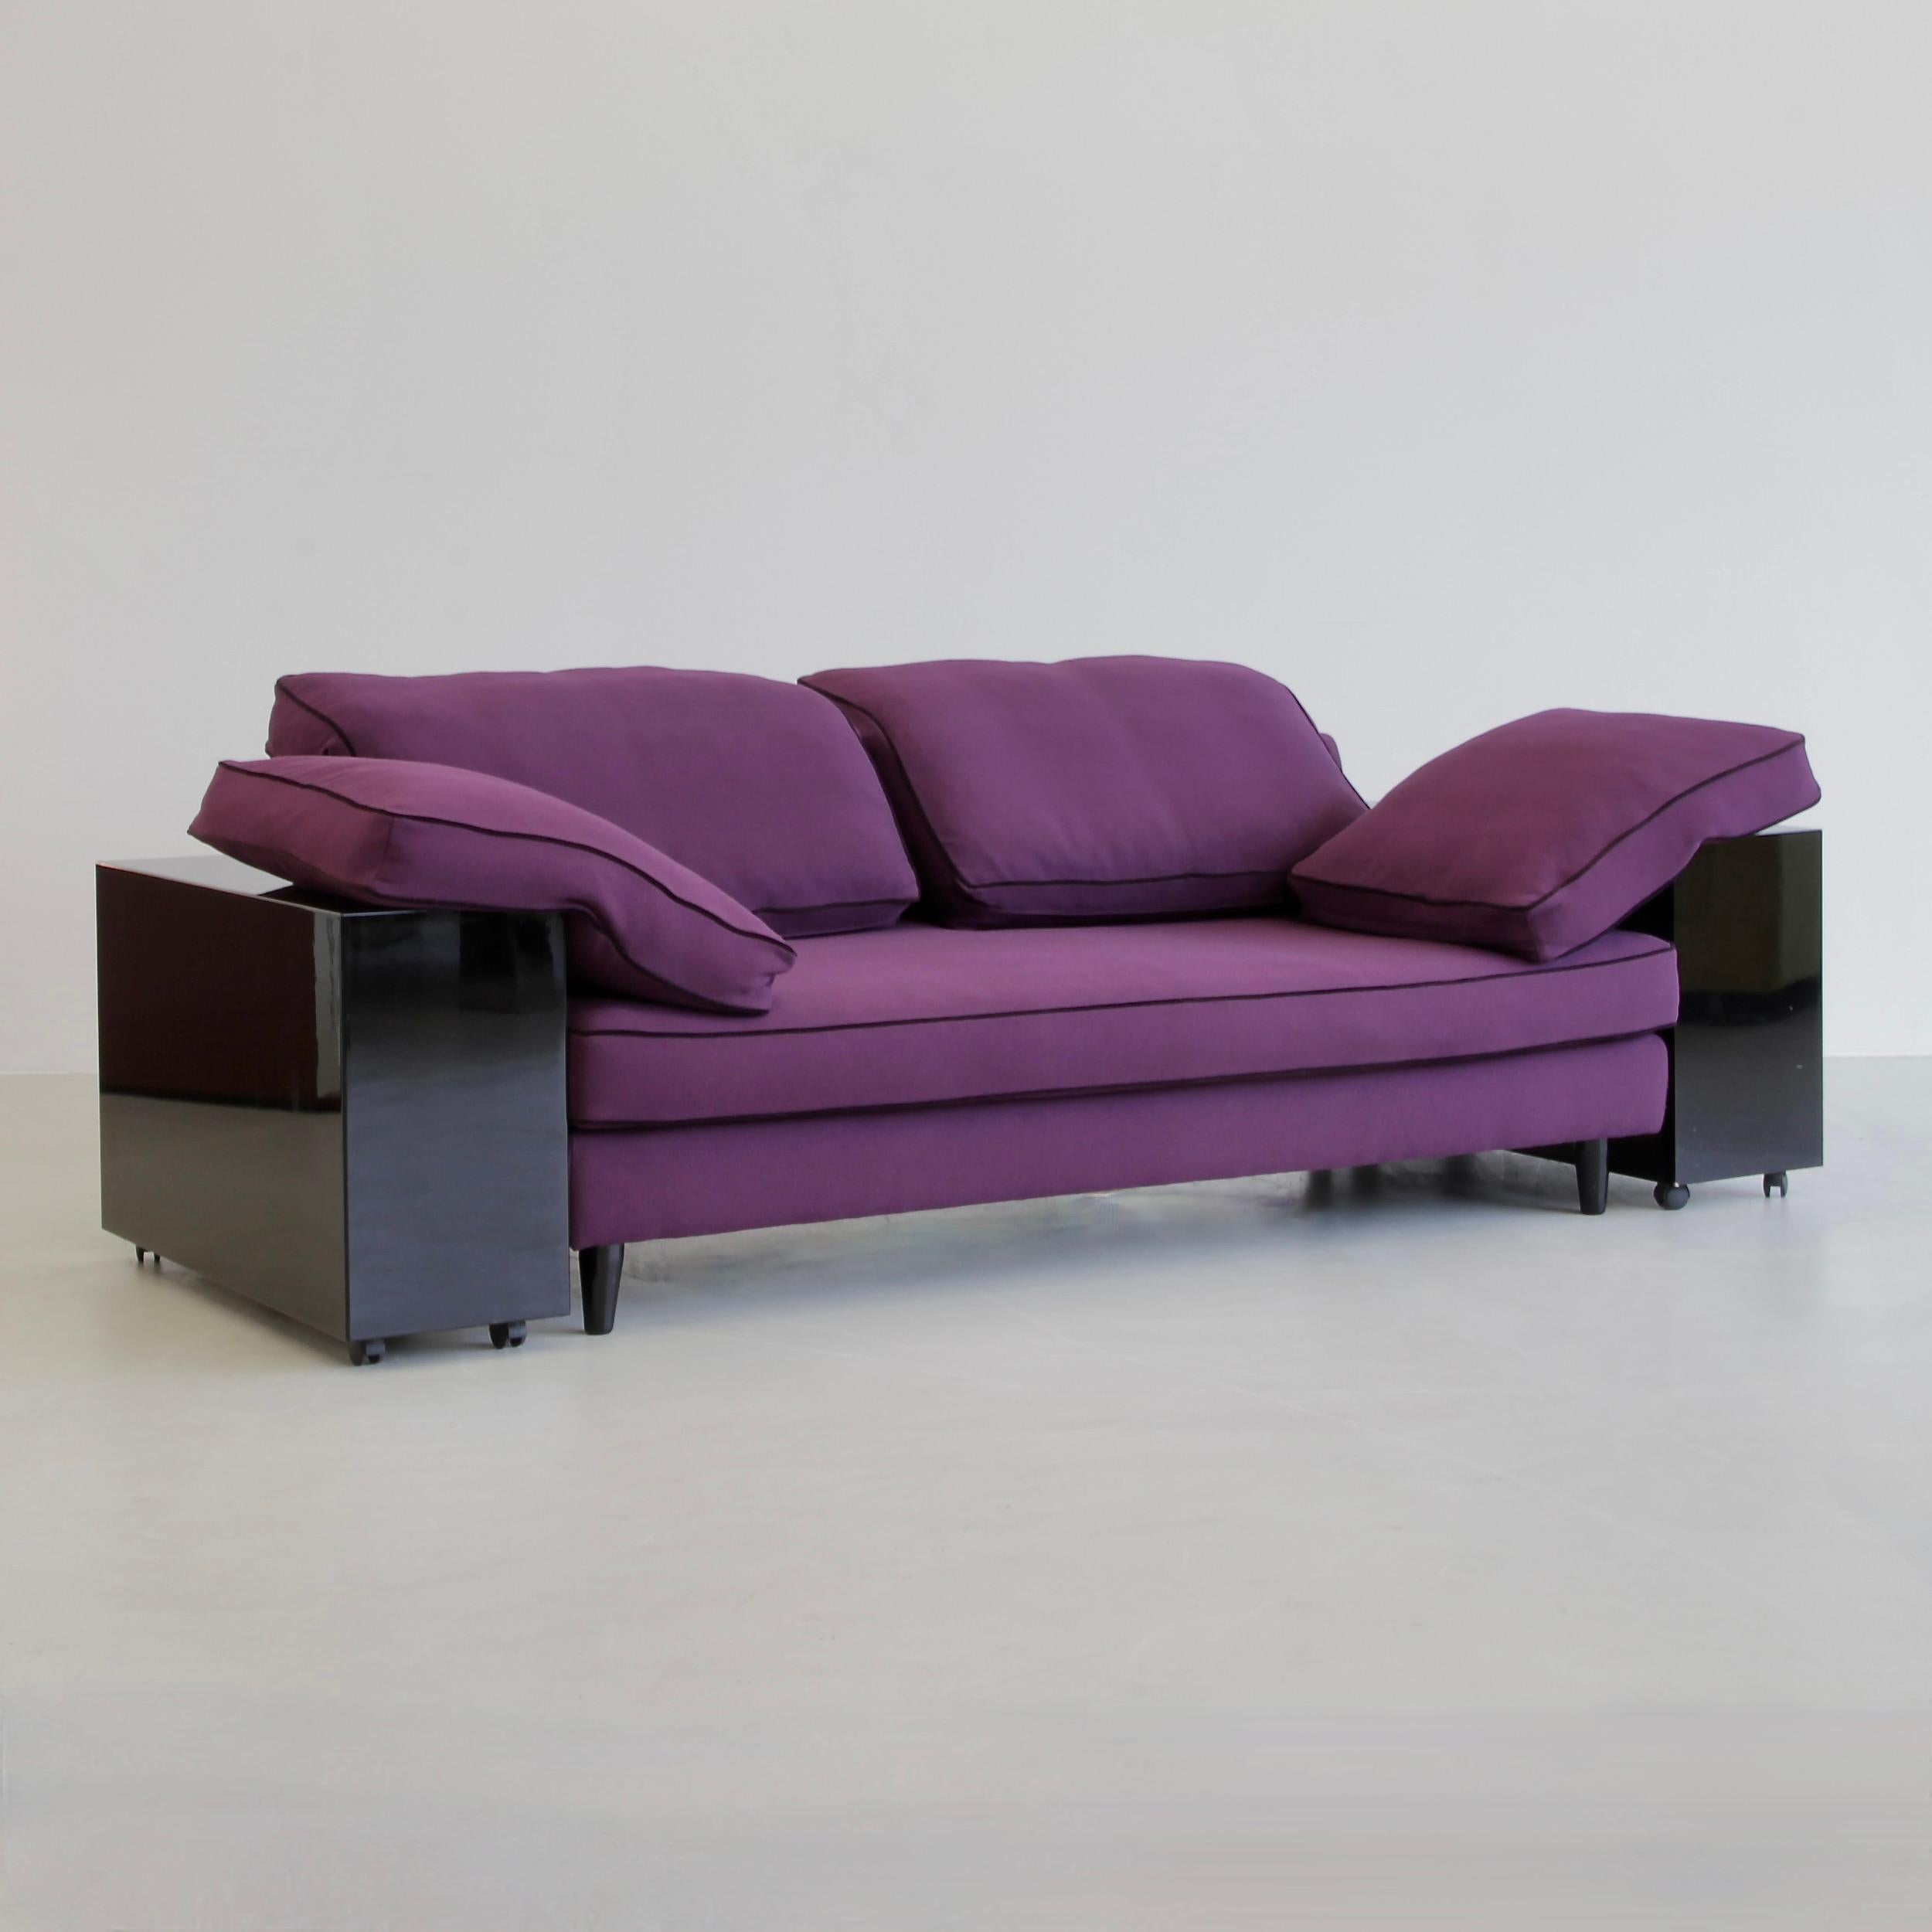 LOTA Sofa by Eileen Gray For Sale at 1stDibs